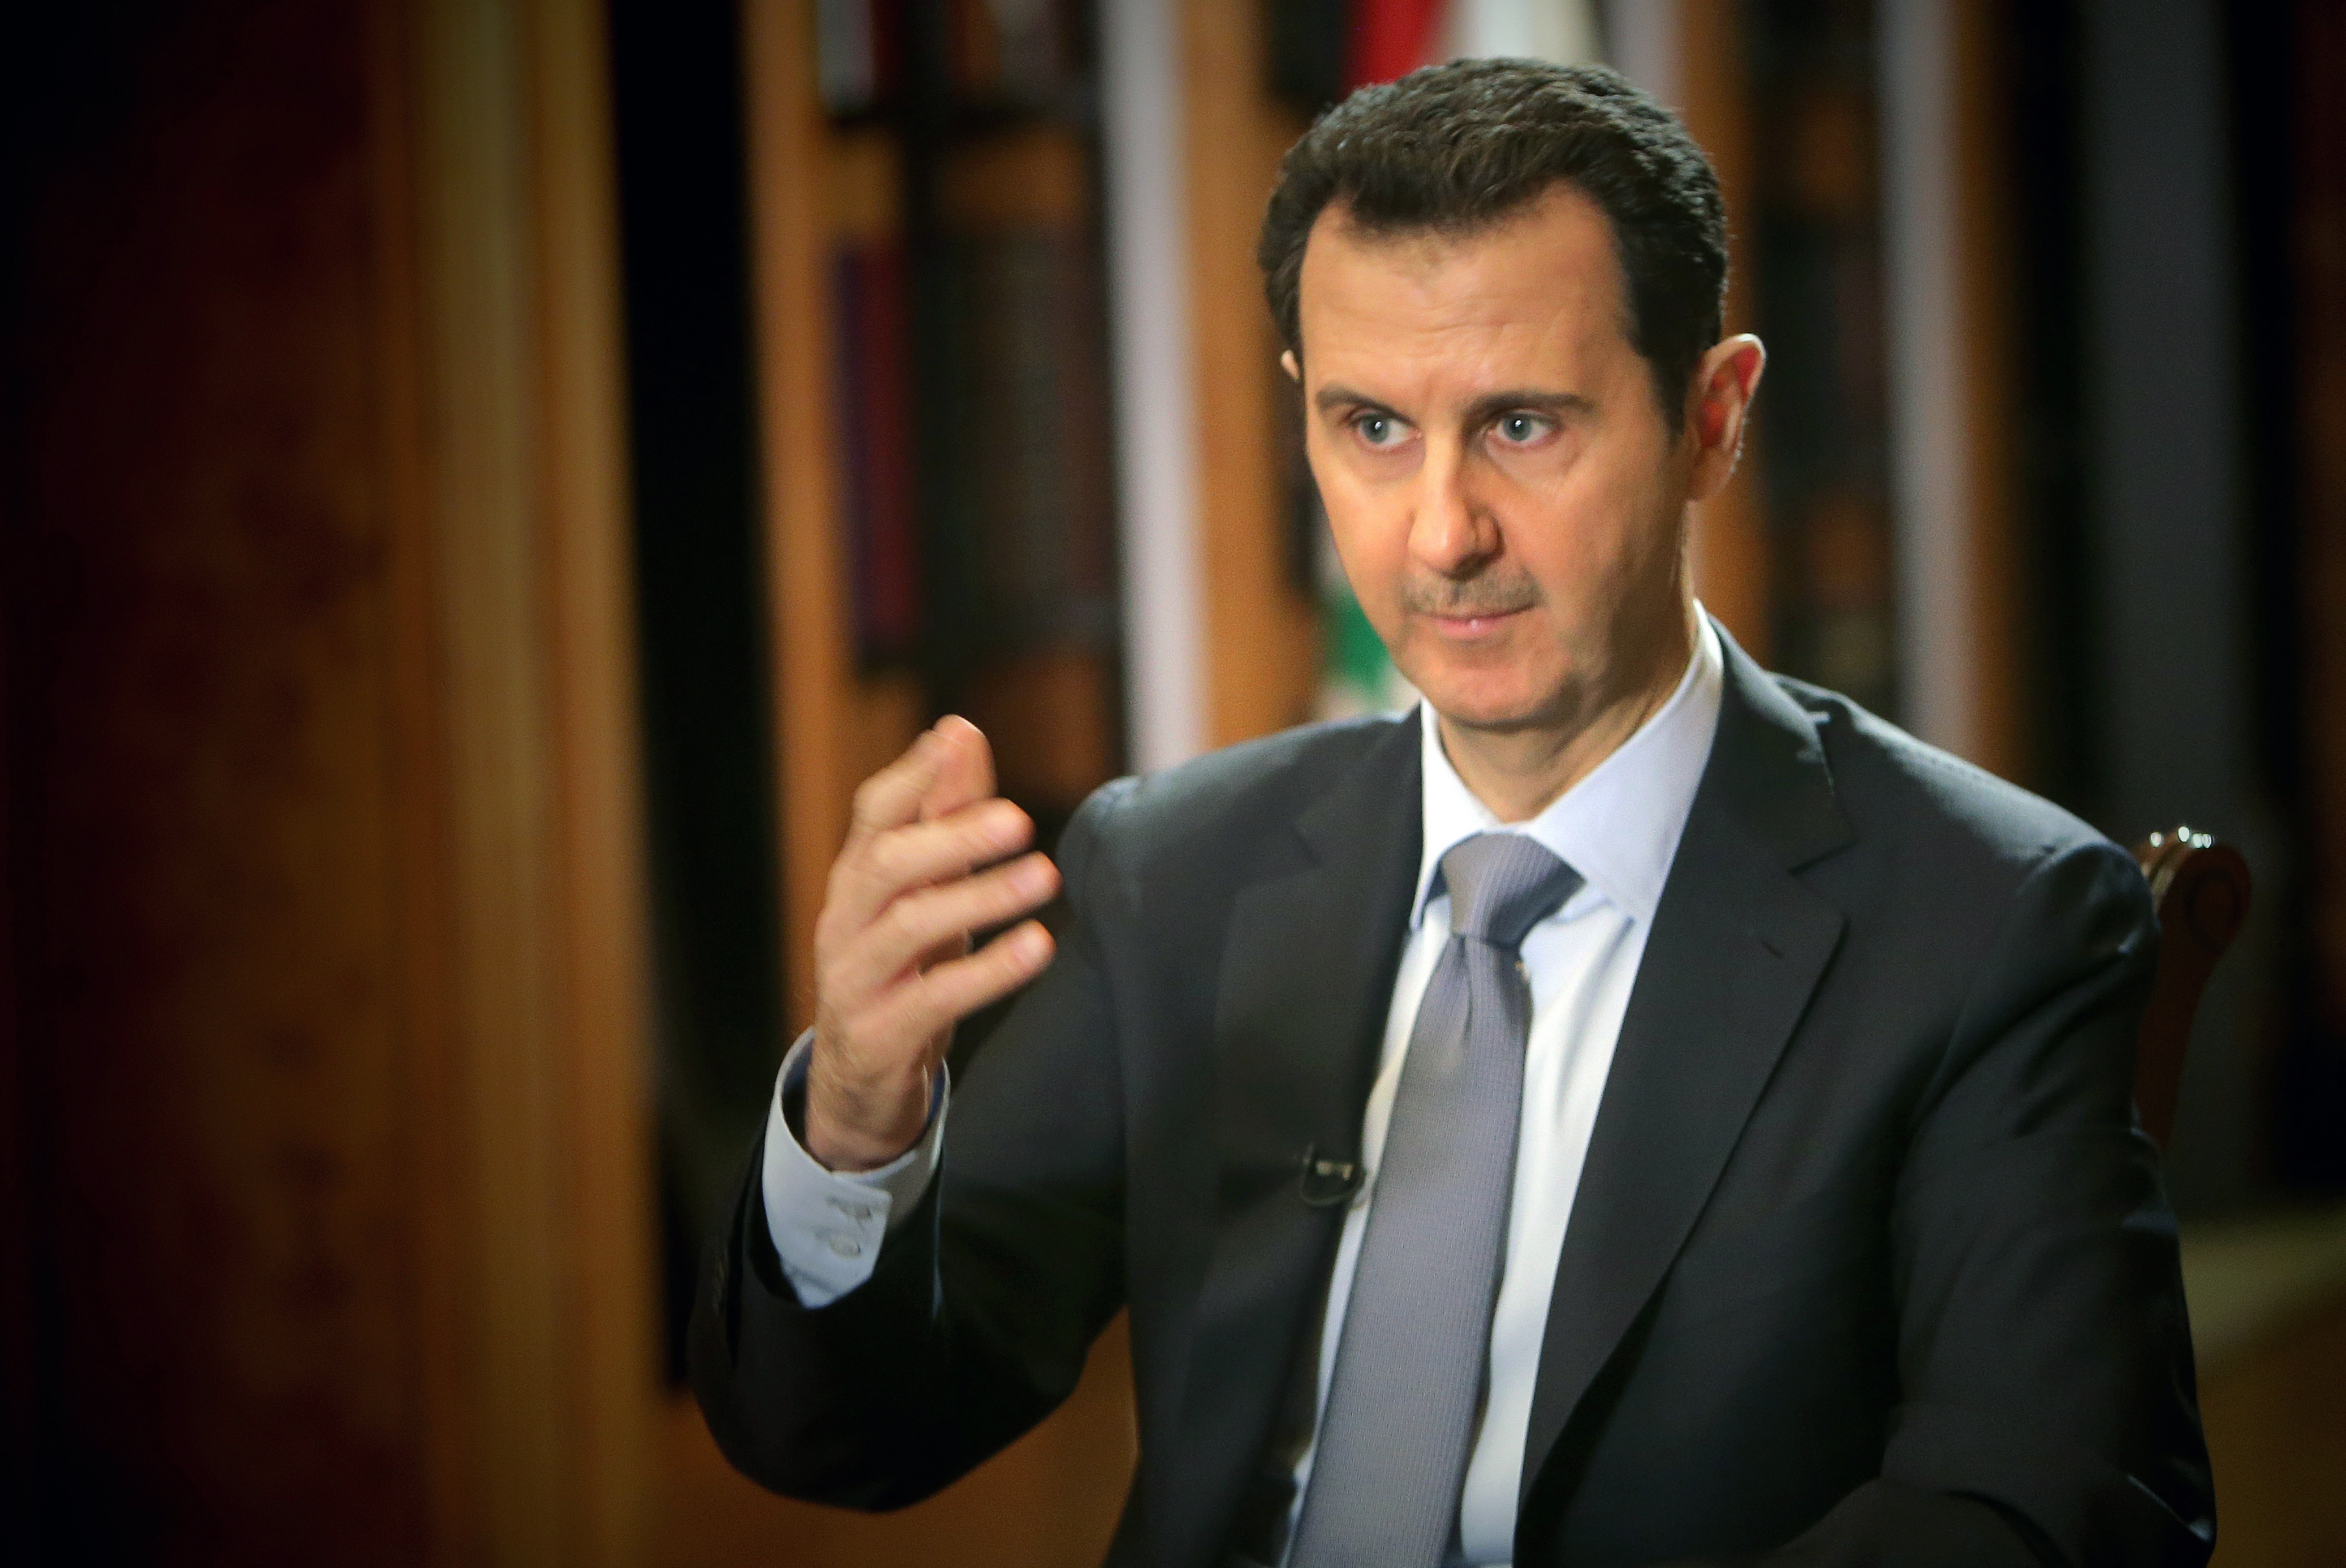 Syrian President Bashar al-Assad speaks during an interview with AFP at the presidential palace in Damascus on January 20, 2014. (Joseph Eid—AFP/Getty Images)